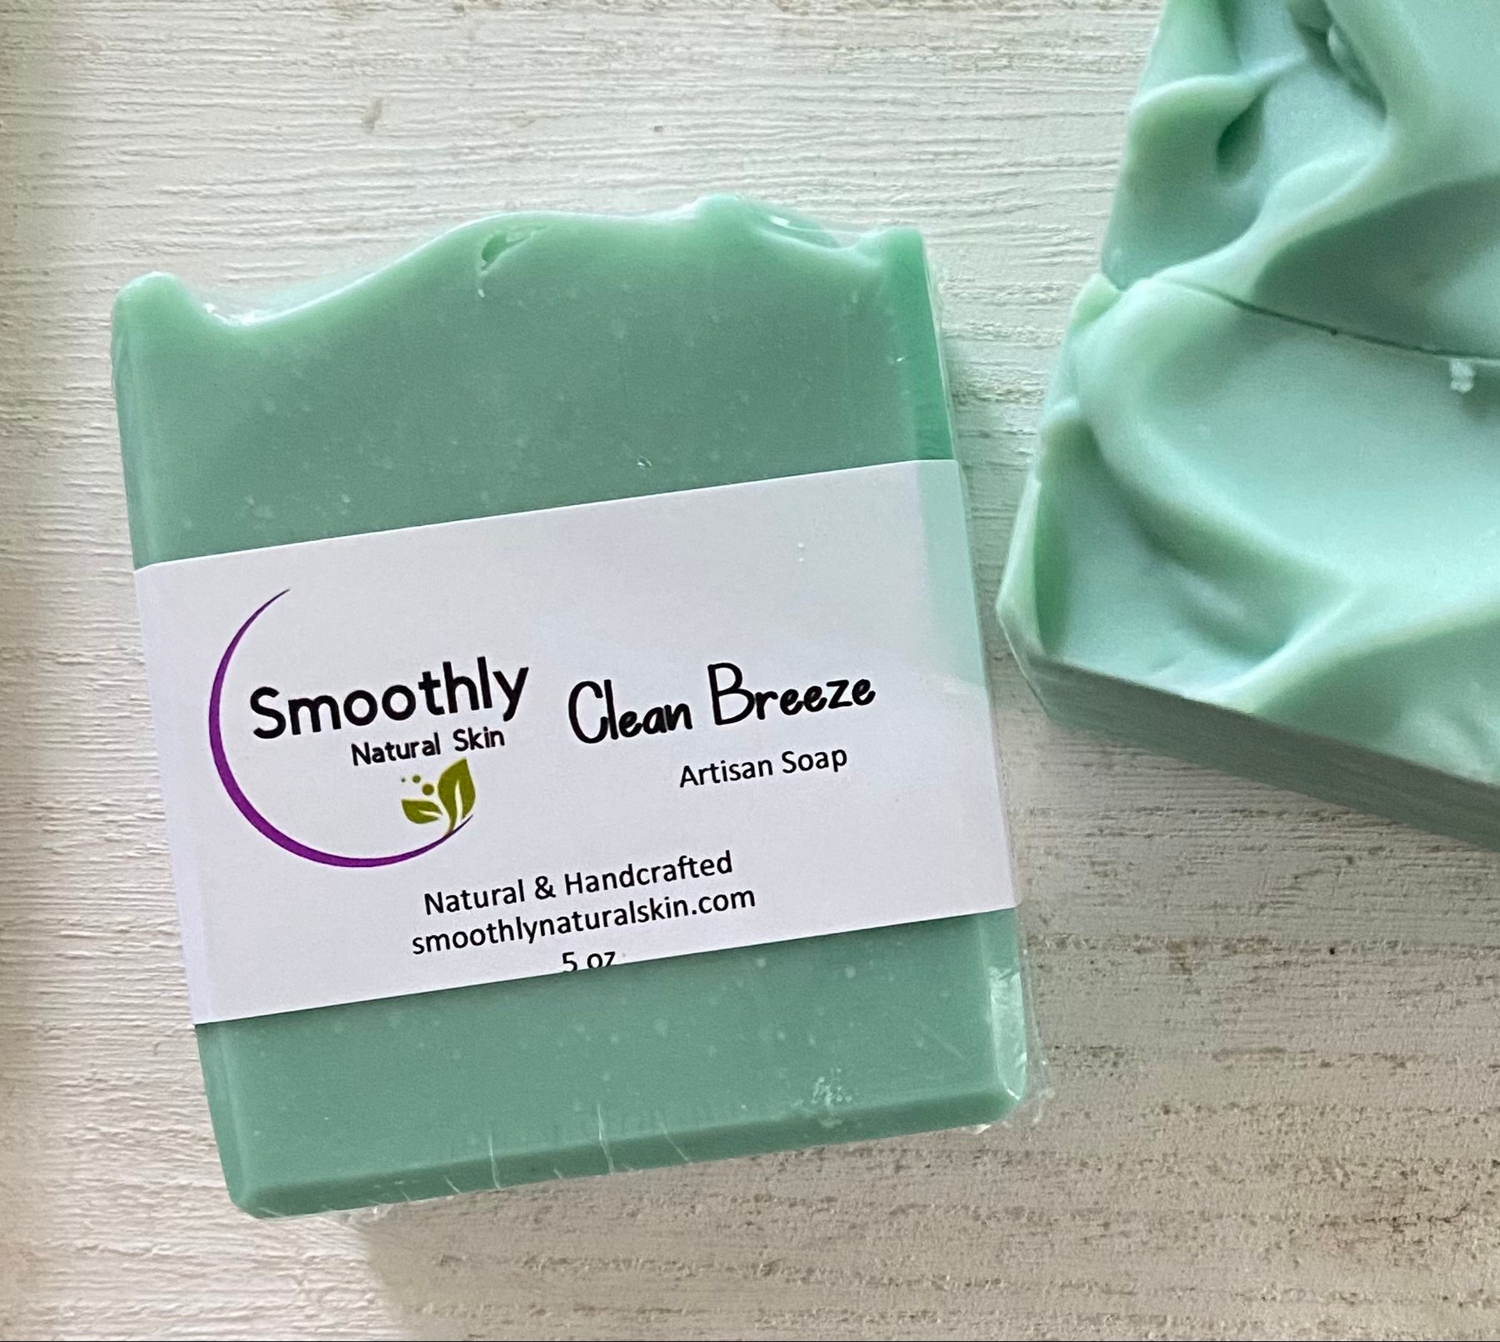 Clean Breeze Soap has a fruity floral blend of peach, watermelon, neroli and jasmine on a dry down of aquatic notes and musk. Smoothly Natural Skin 